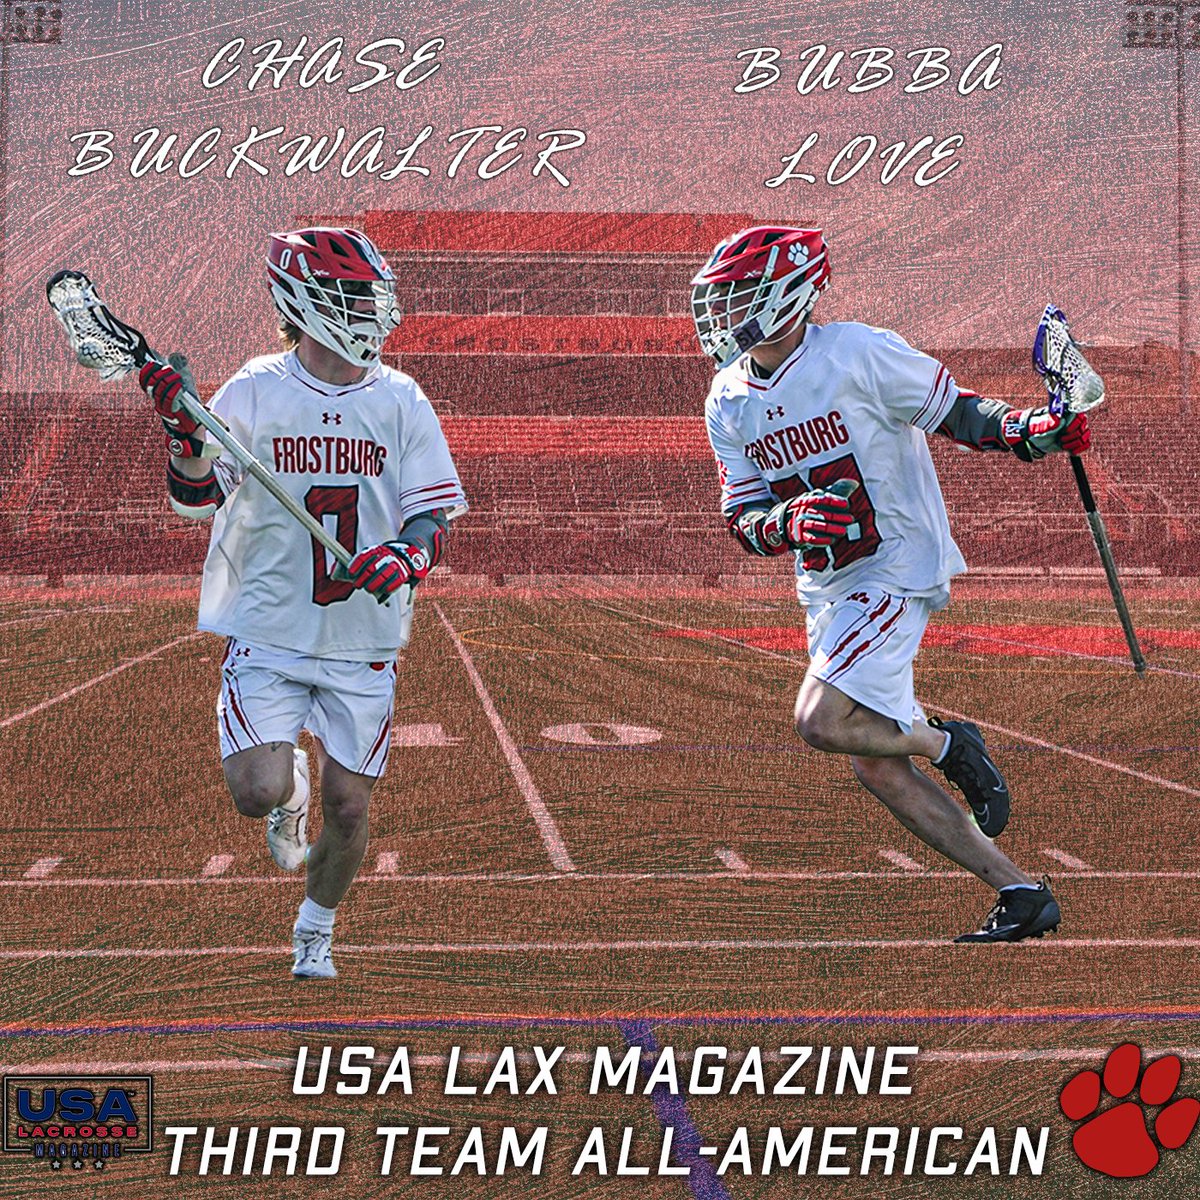 Congrats to Bubba and Chase on being named USA Lacrosse Magazine All-Americans! #BobcatPride